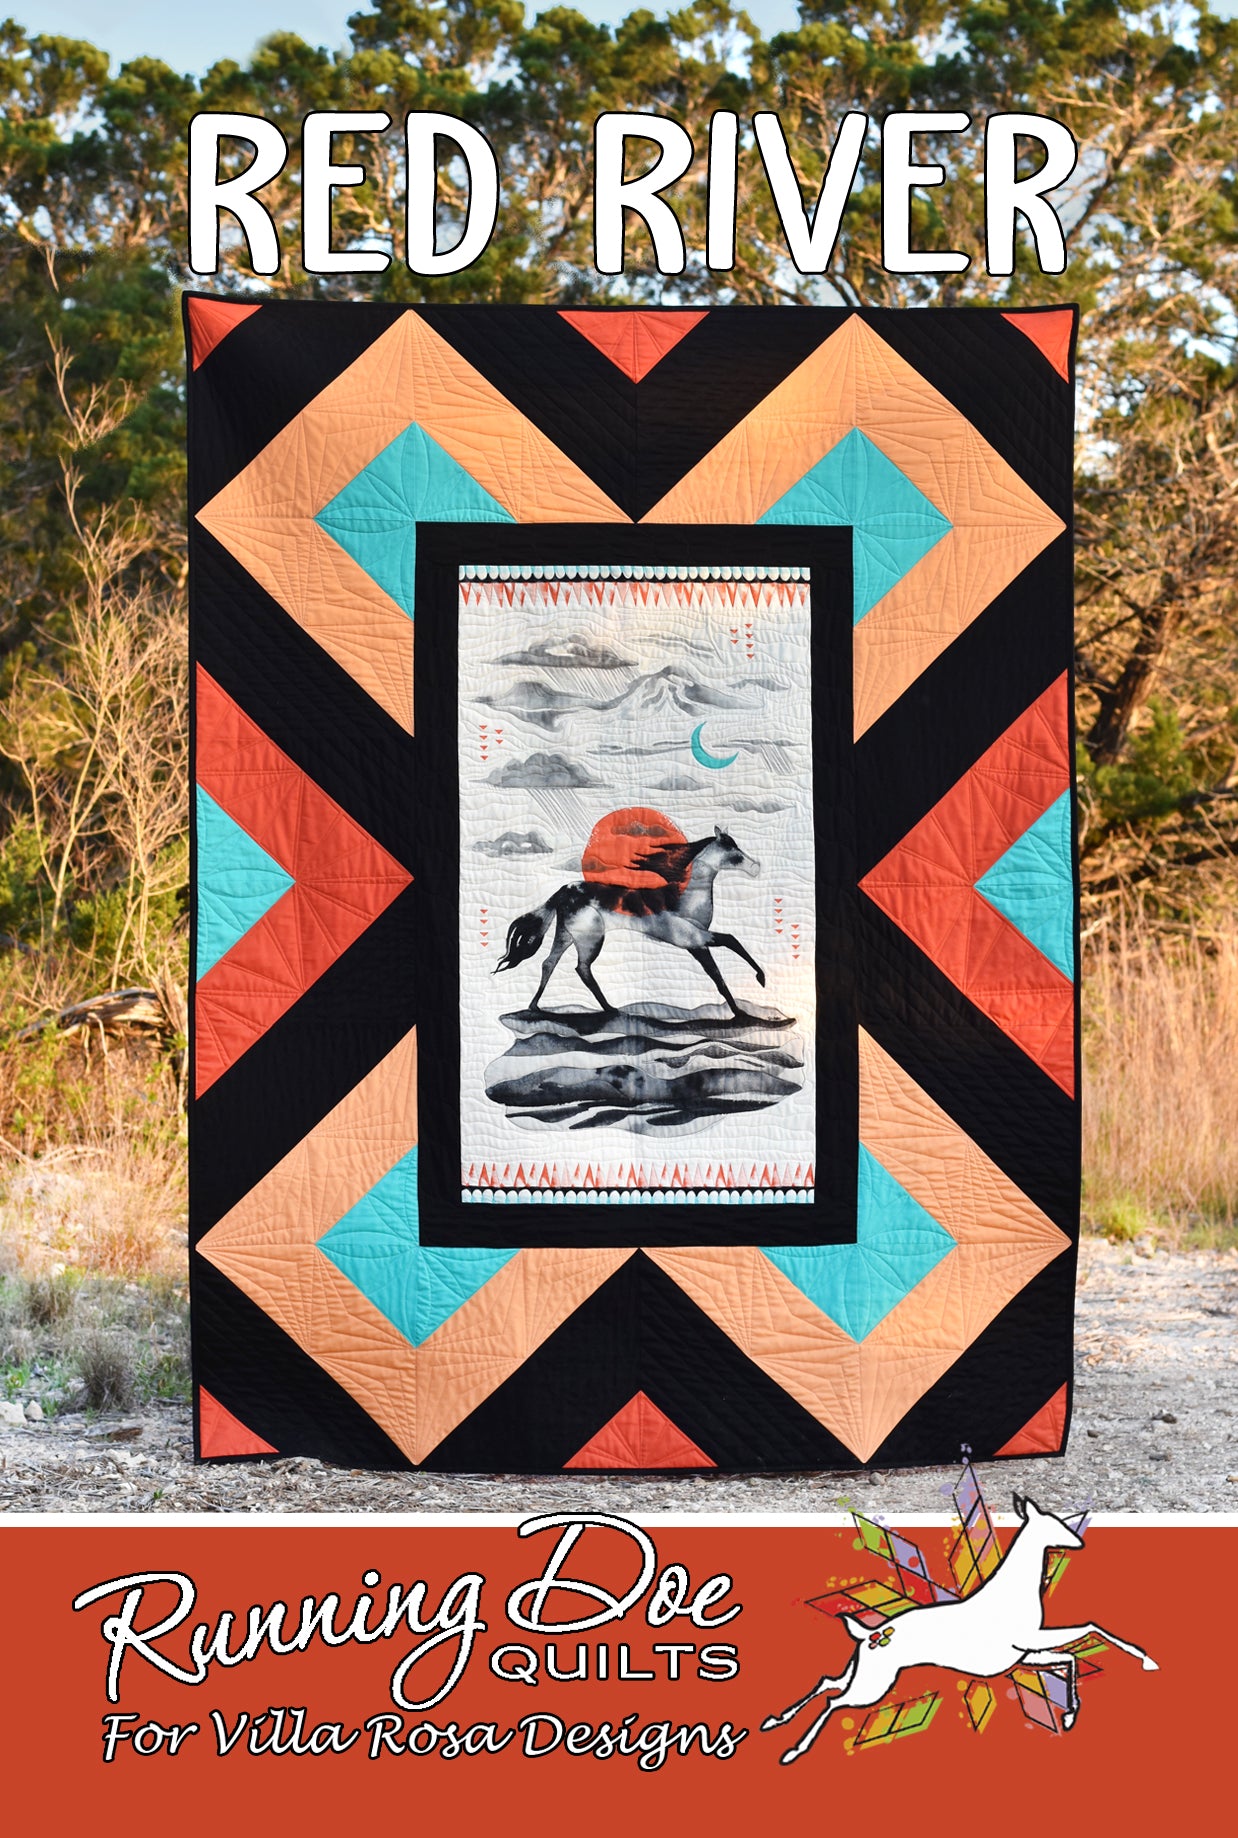 Red River PDF Quilt Pattern by Villa Rosa Designs